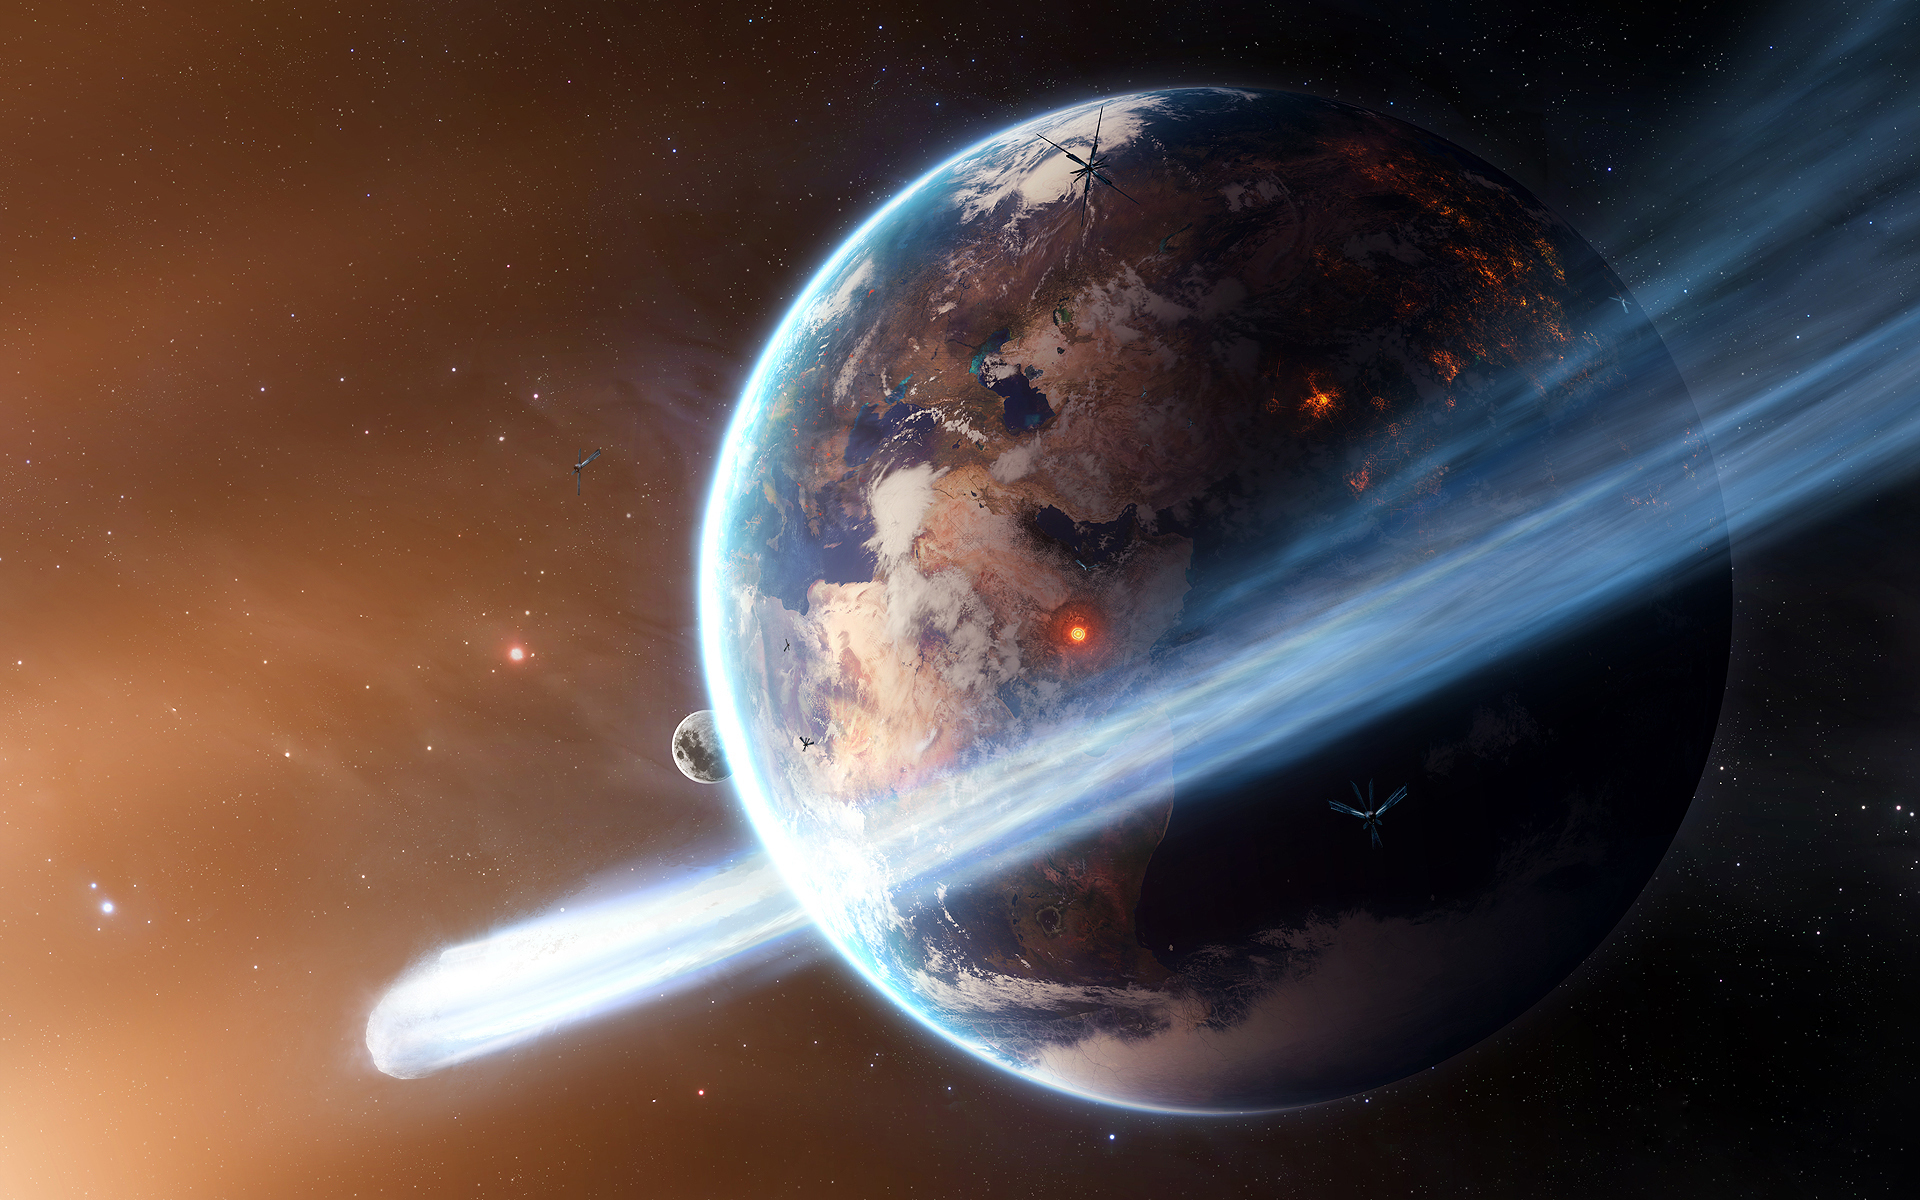 comet, star, space, apocalyptic, meteor, planet, stars, earth, sci fi Free Stock Photo